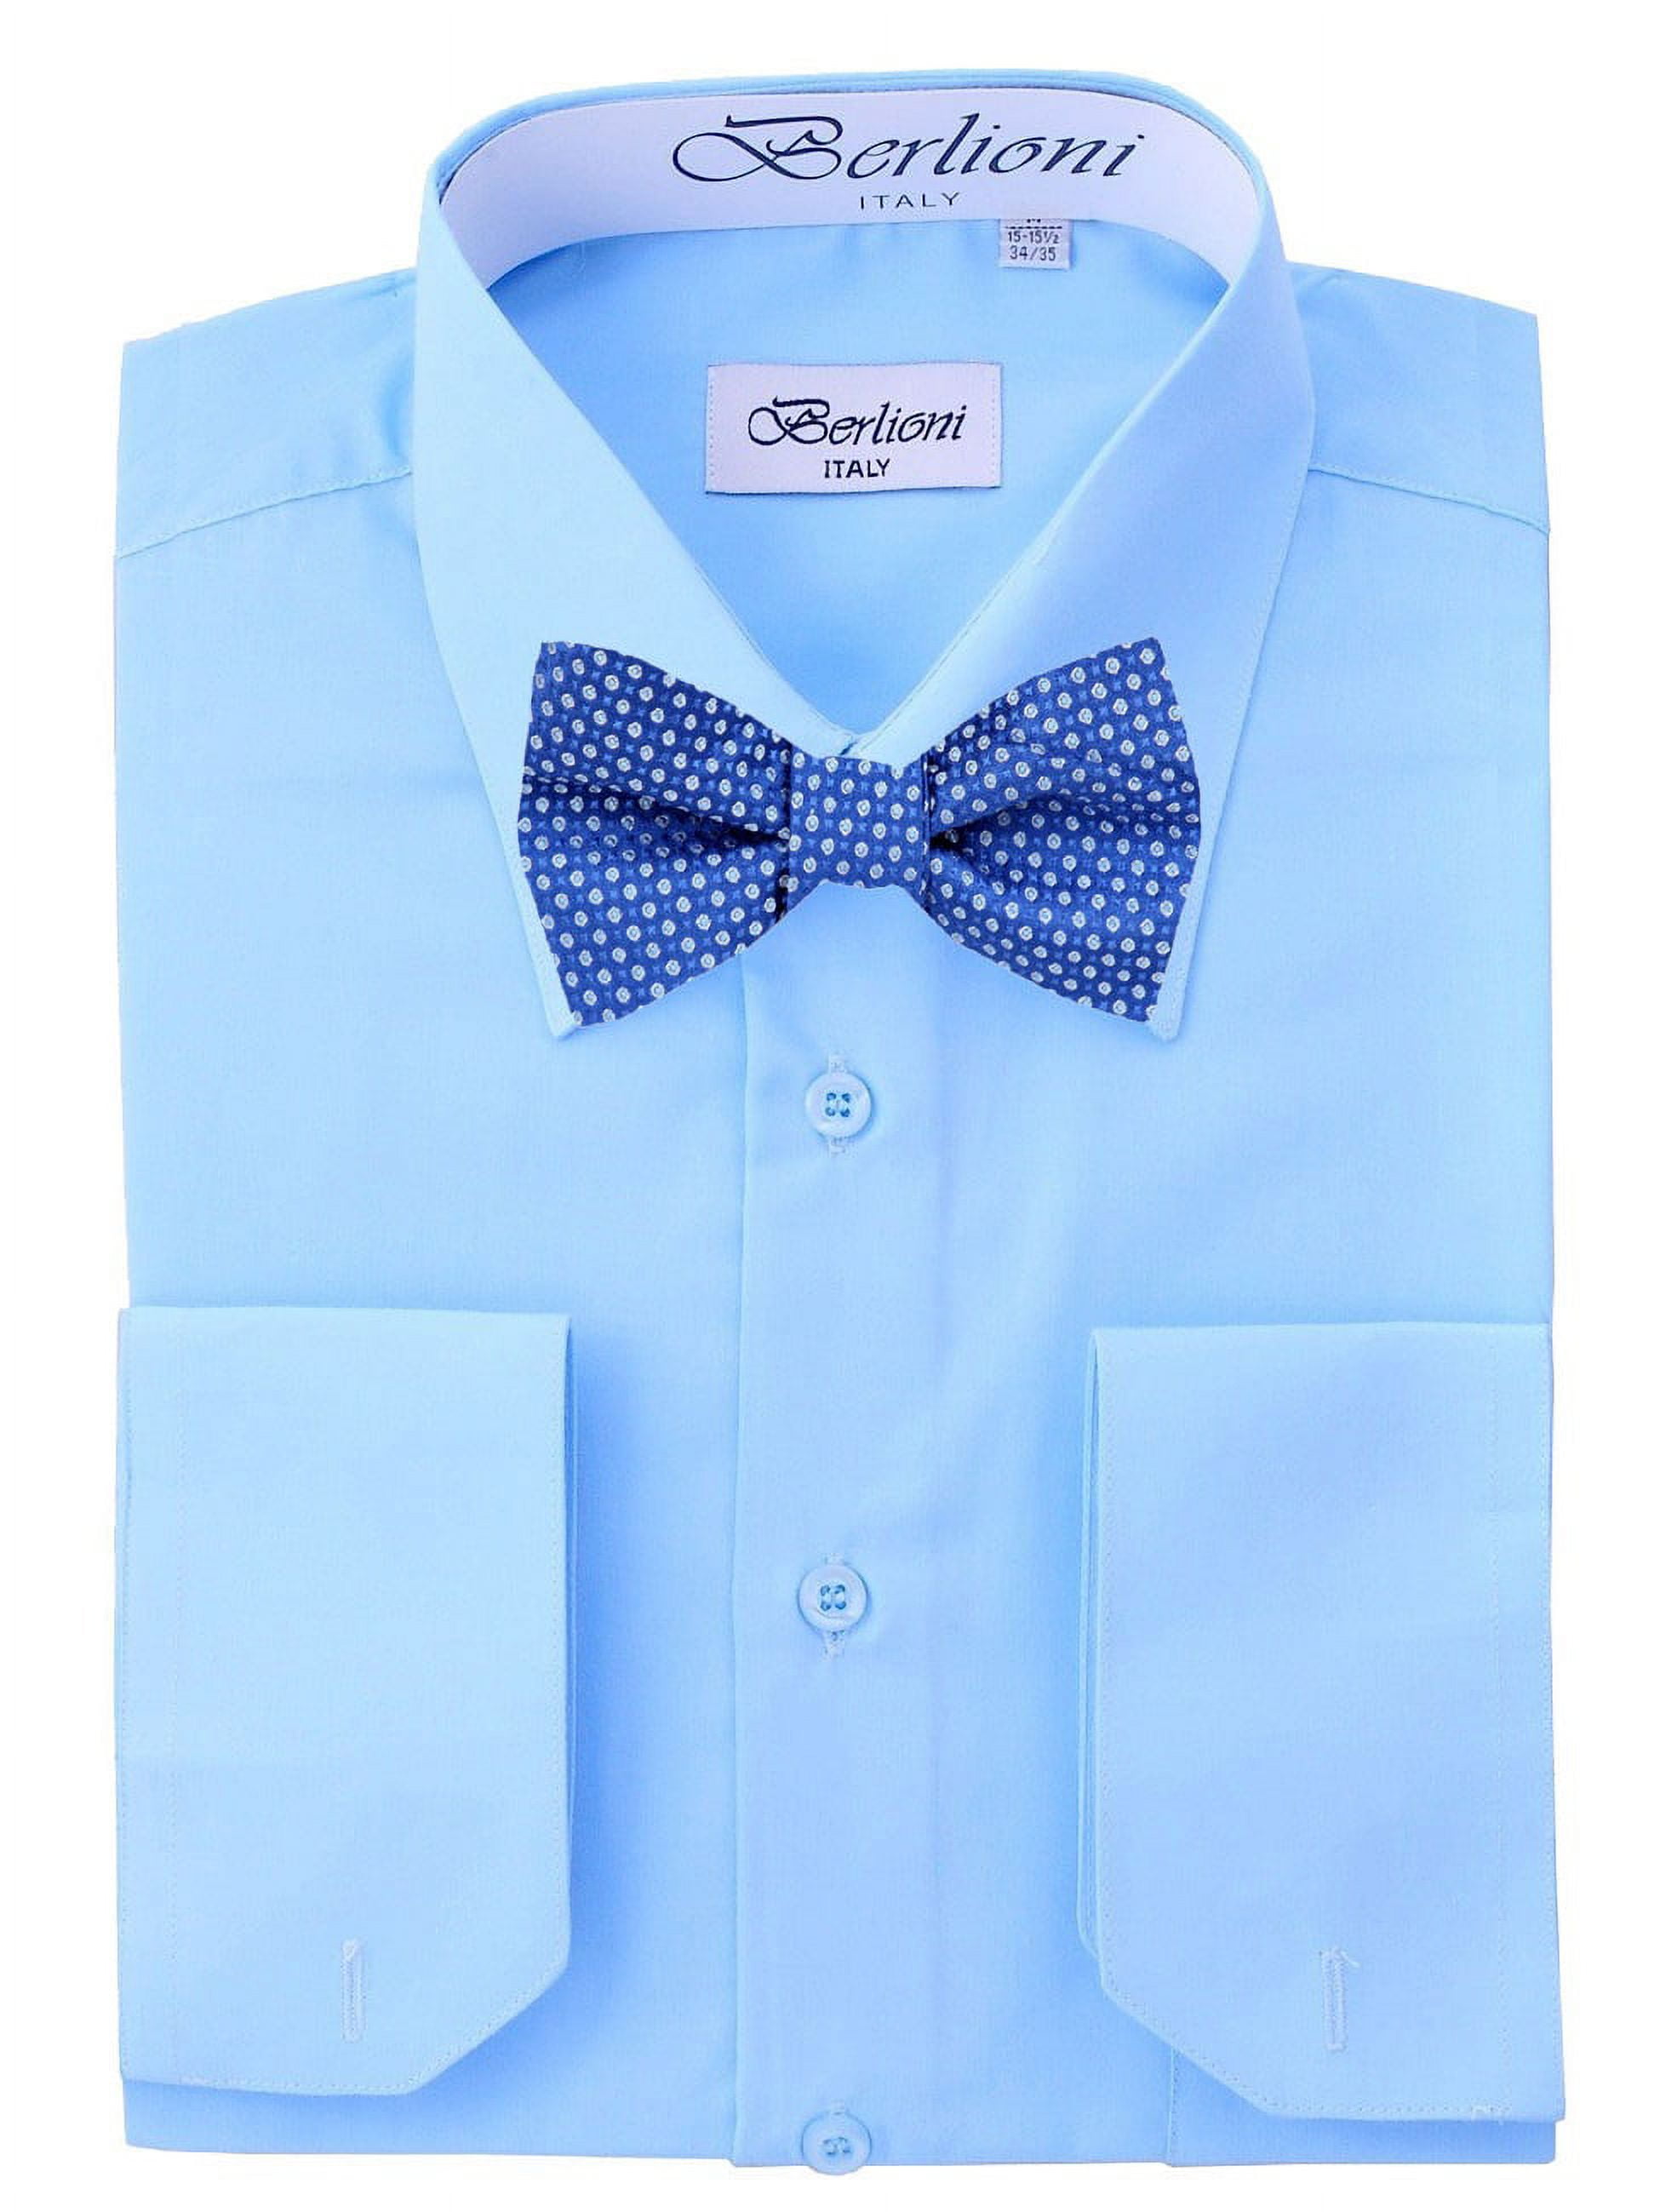 SELF TIE SATIN BOW LIGHT BLUE – SHOW SHIRT ACCESSORY - Mequicine Official  Store